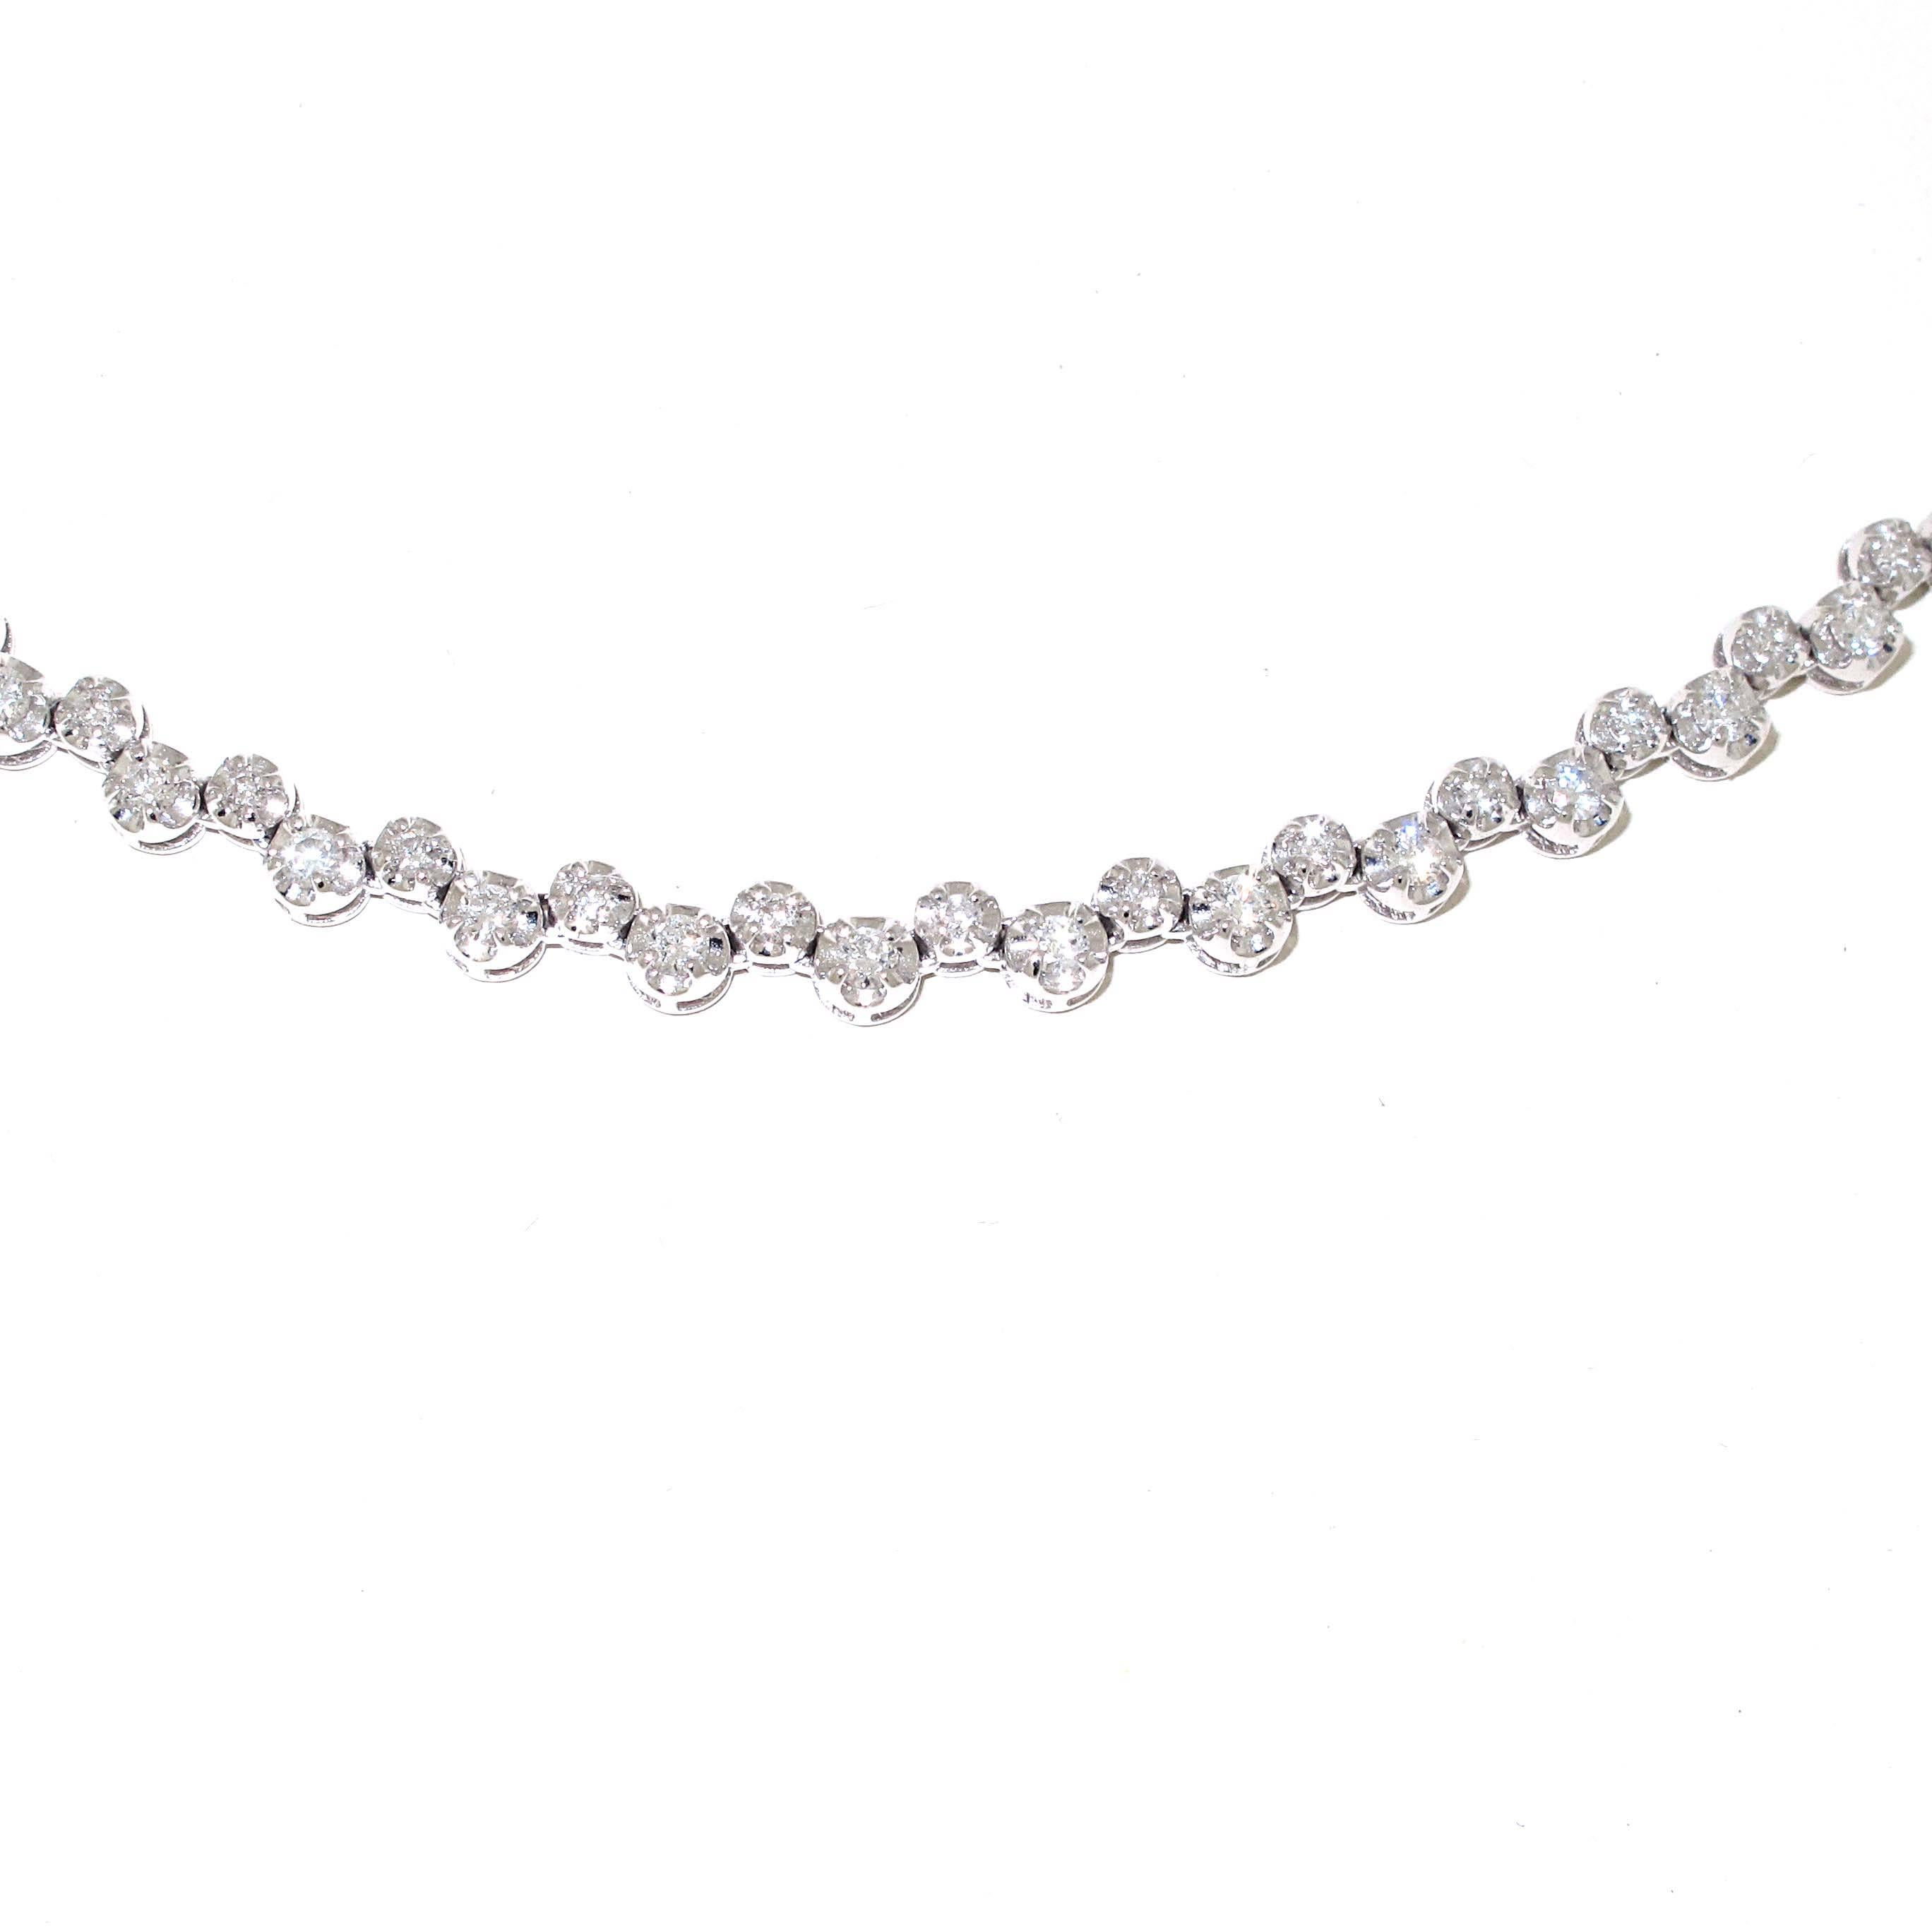 Round Cut 18kt White Gold side by side diamond chain. Over 6 carats of diamonds! 31 inches